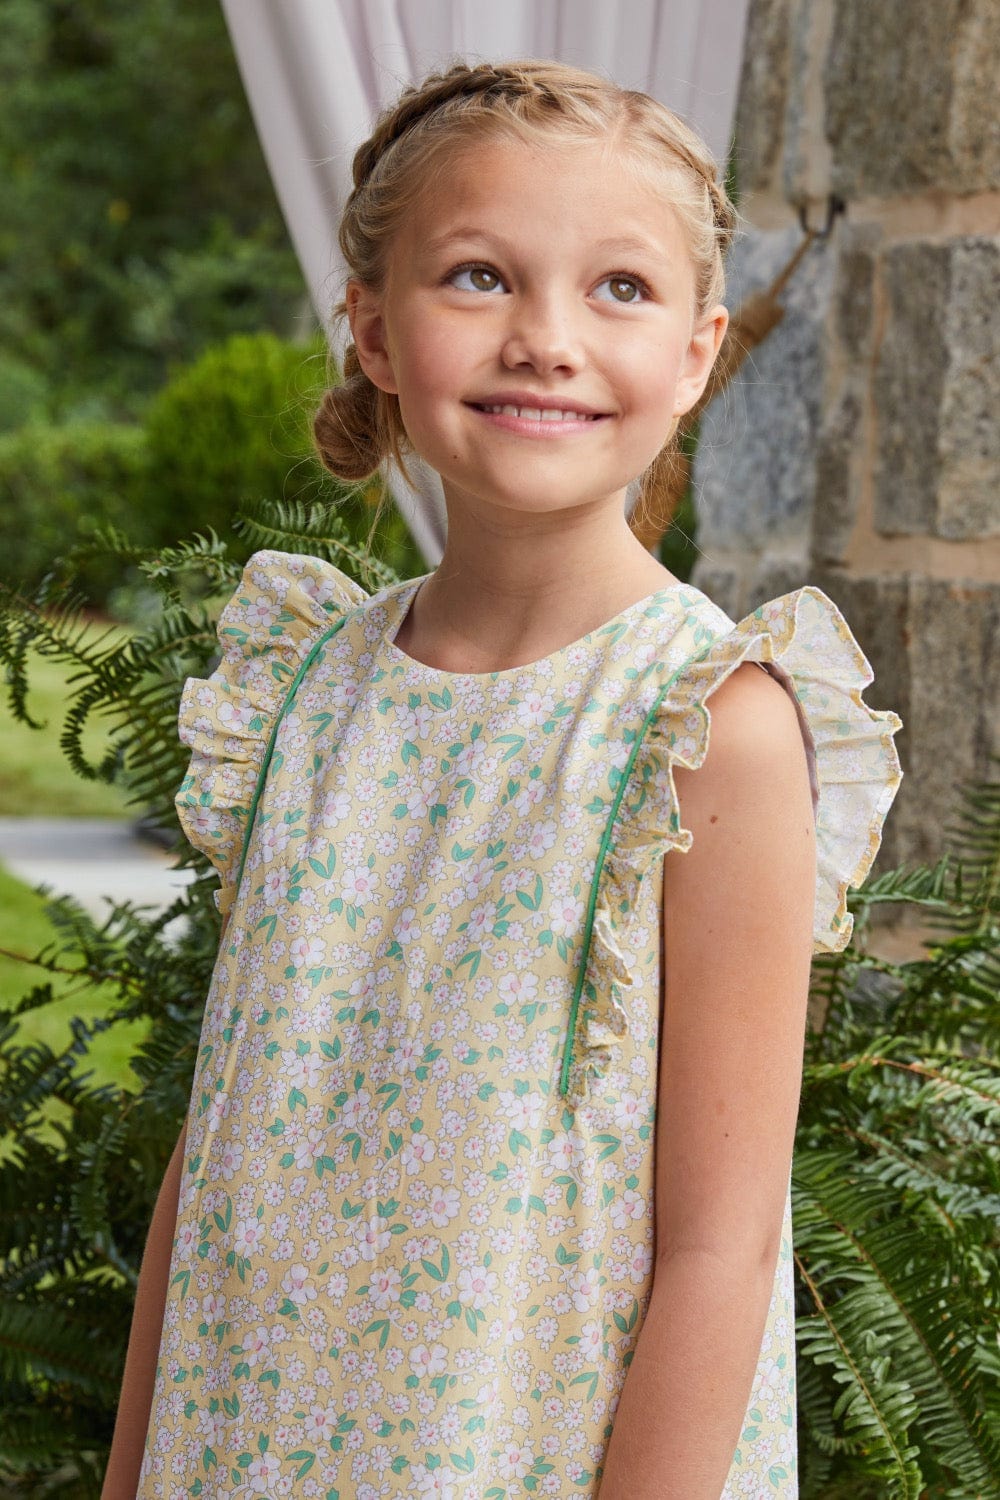 seguridadindustrialcr classic girl's dress in wimbledon floral with flutter sleeves